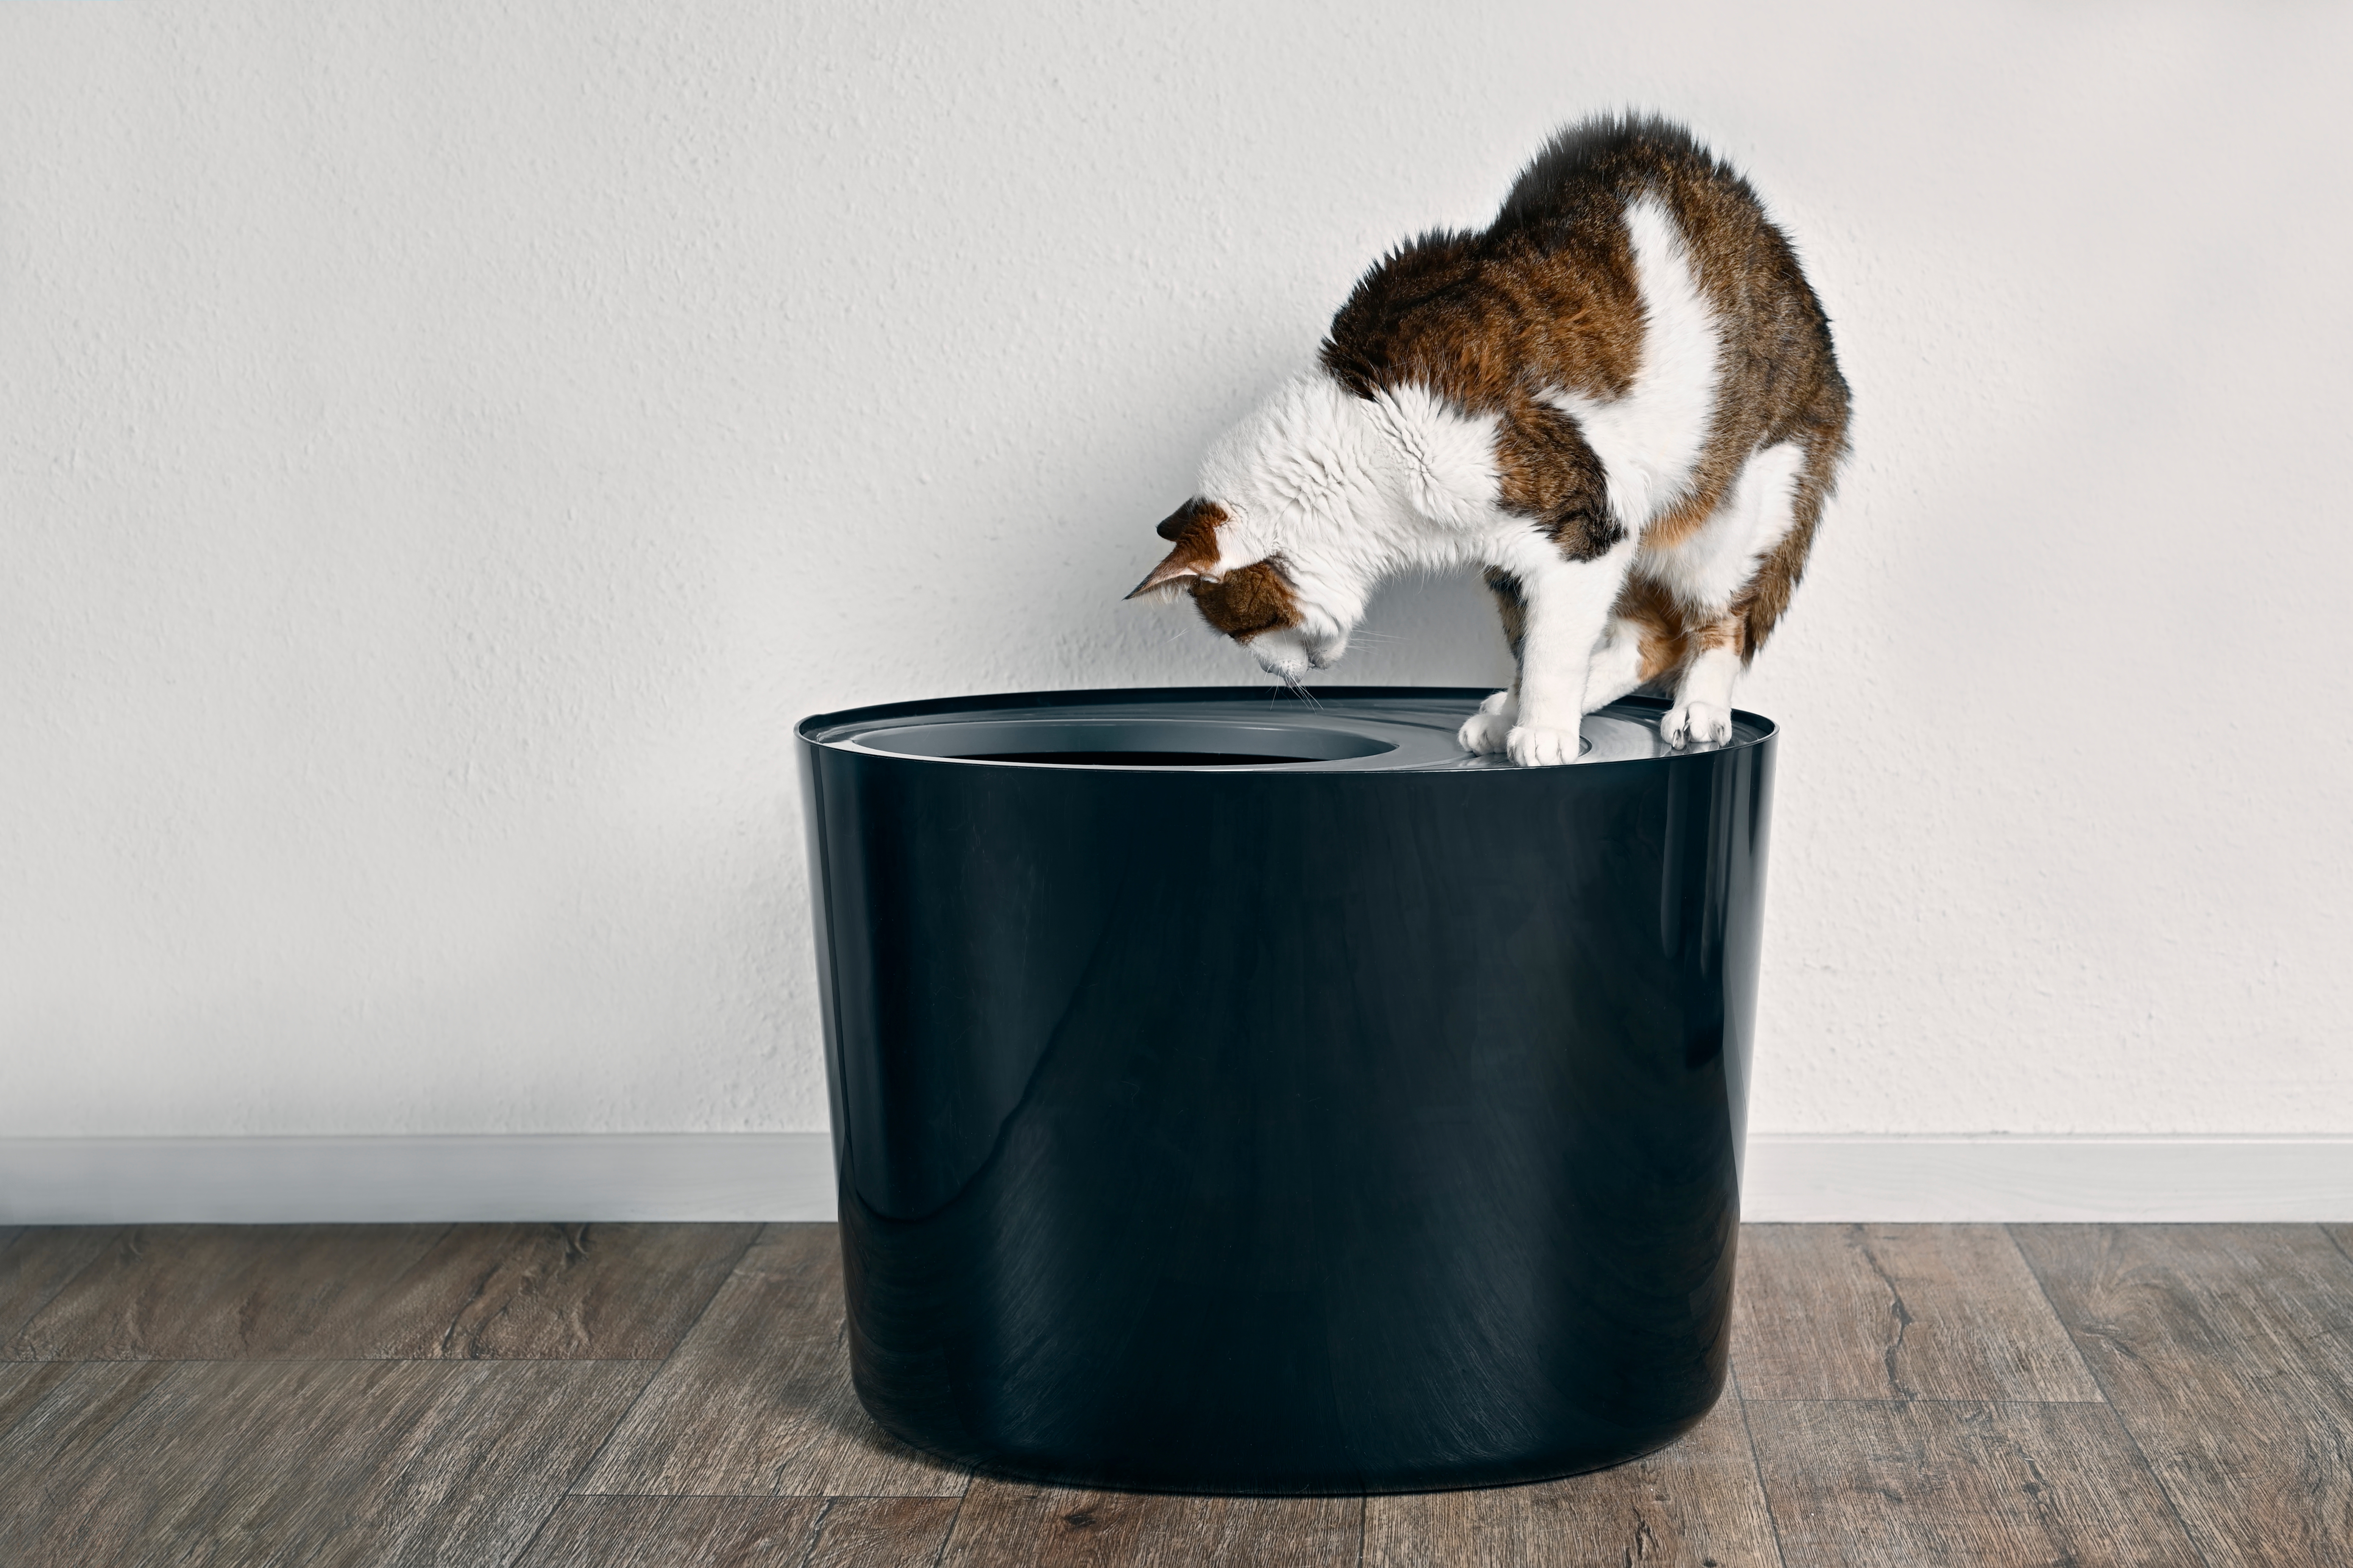 How to Stop Cat Litter Tracking, Top Entry Litter Box